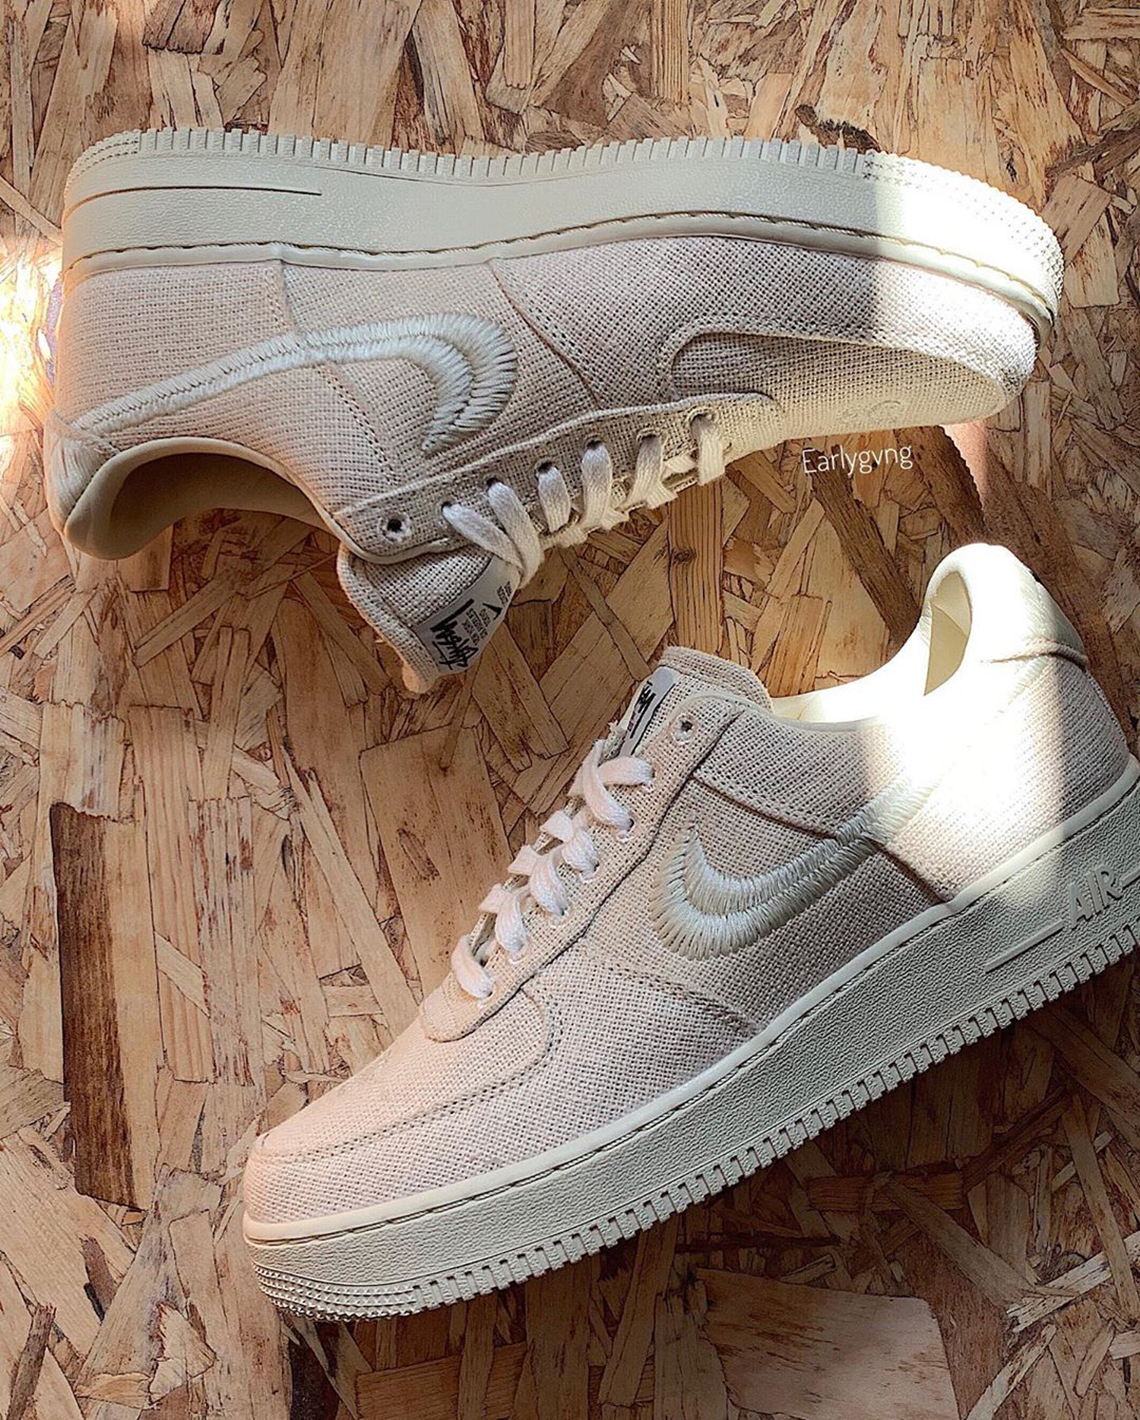 stussy x nike air force 1 release date